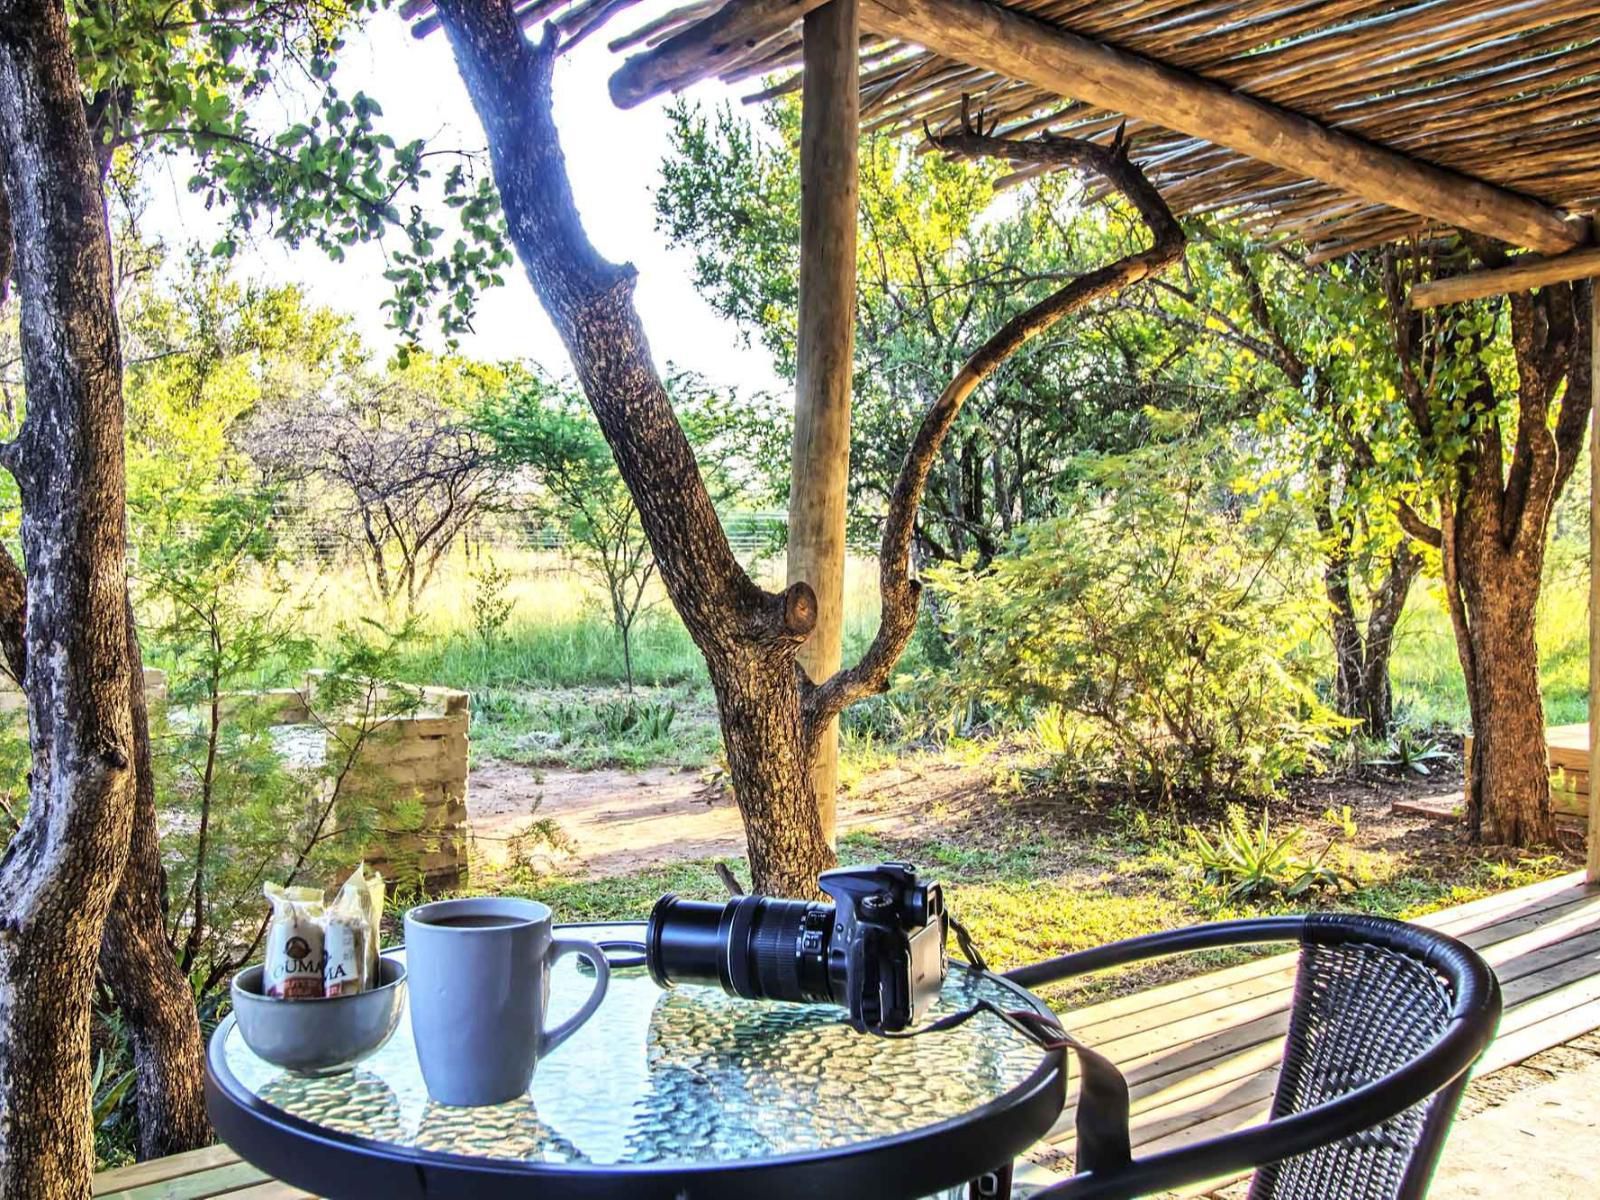 Lookoutsafarilodge The Heartbeat Of Africa Dinokeng Game Reserve Gauteng South Africa Cup, Drinking Accessoire, Drink, Food